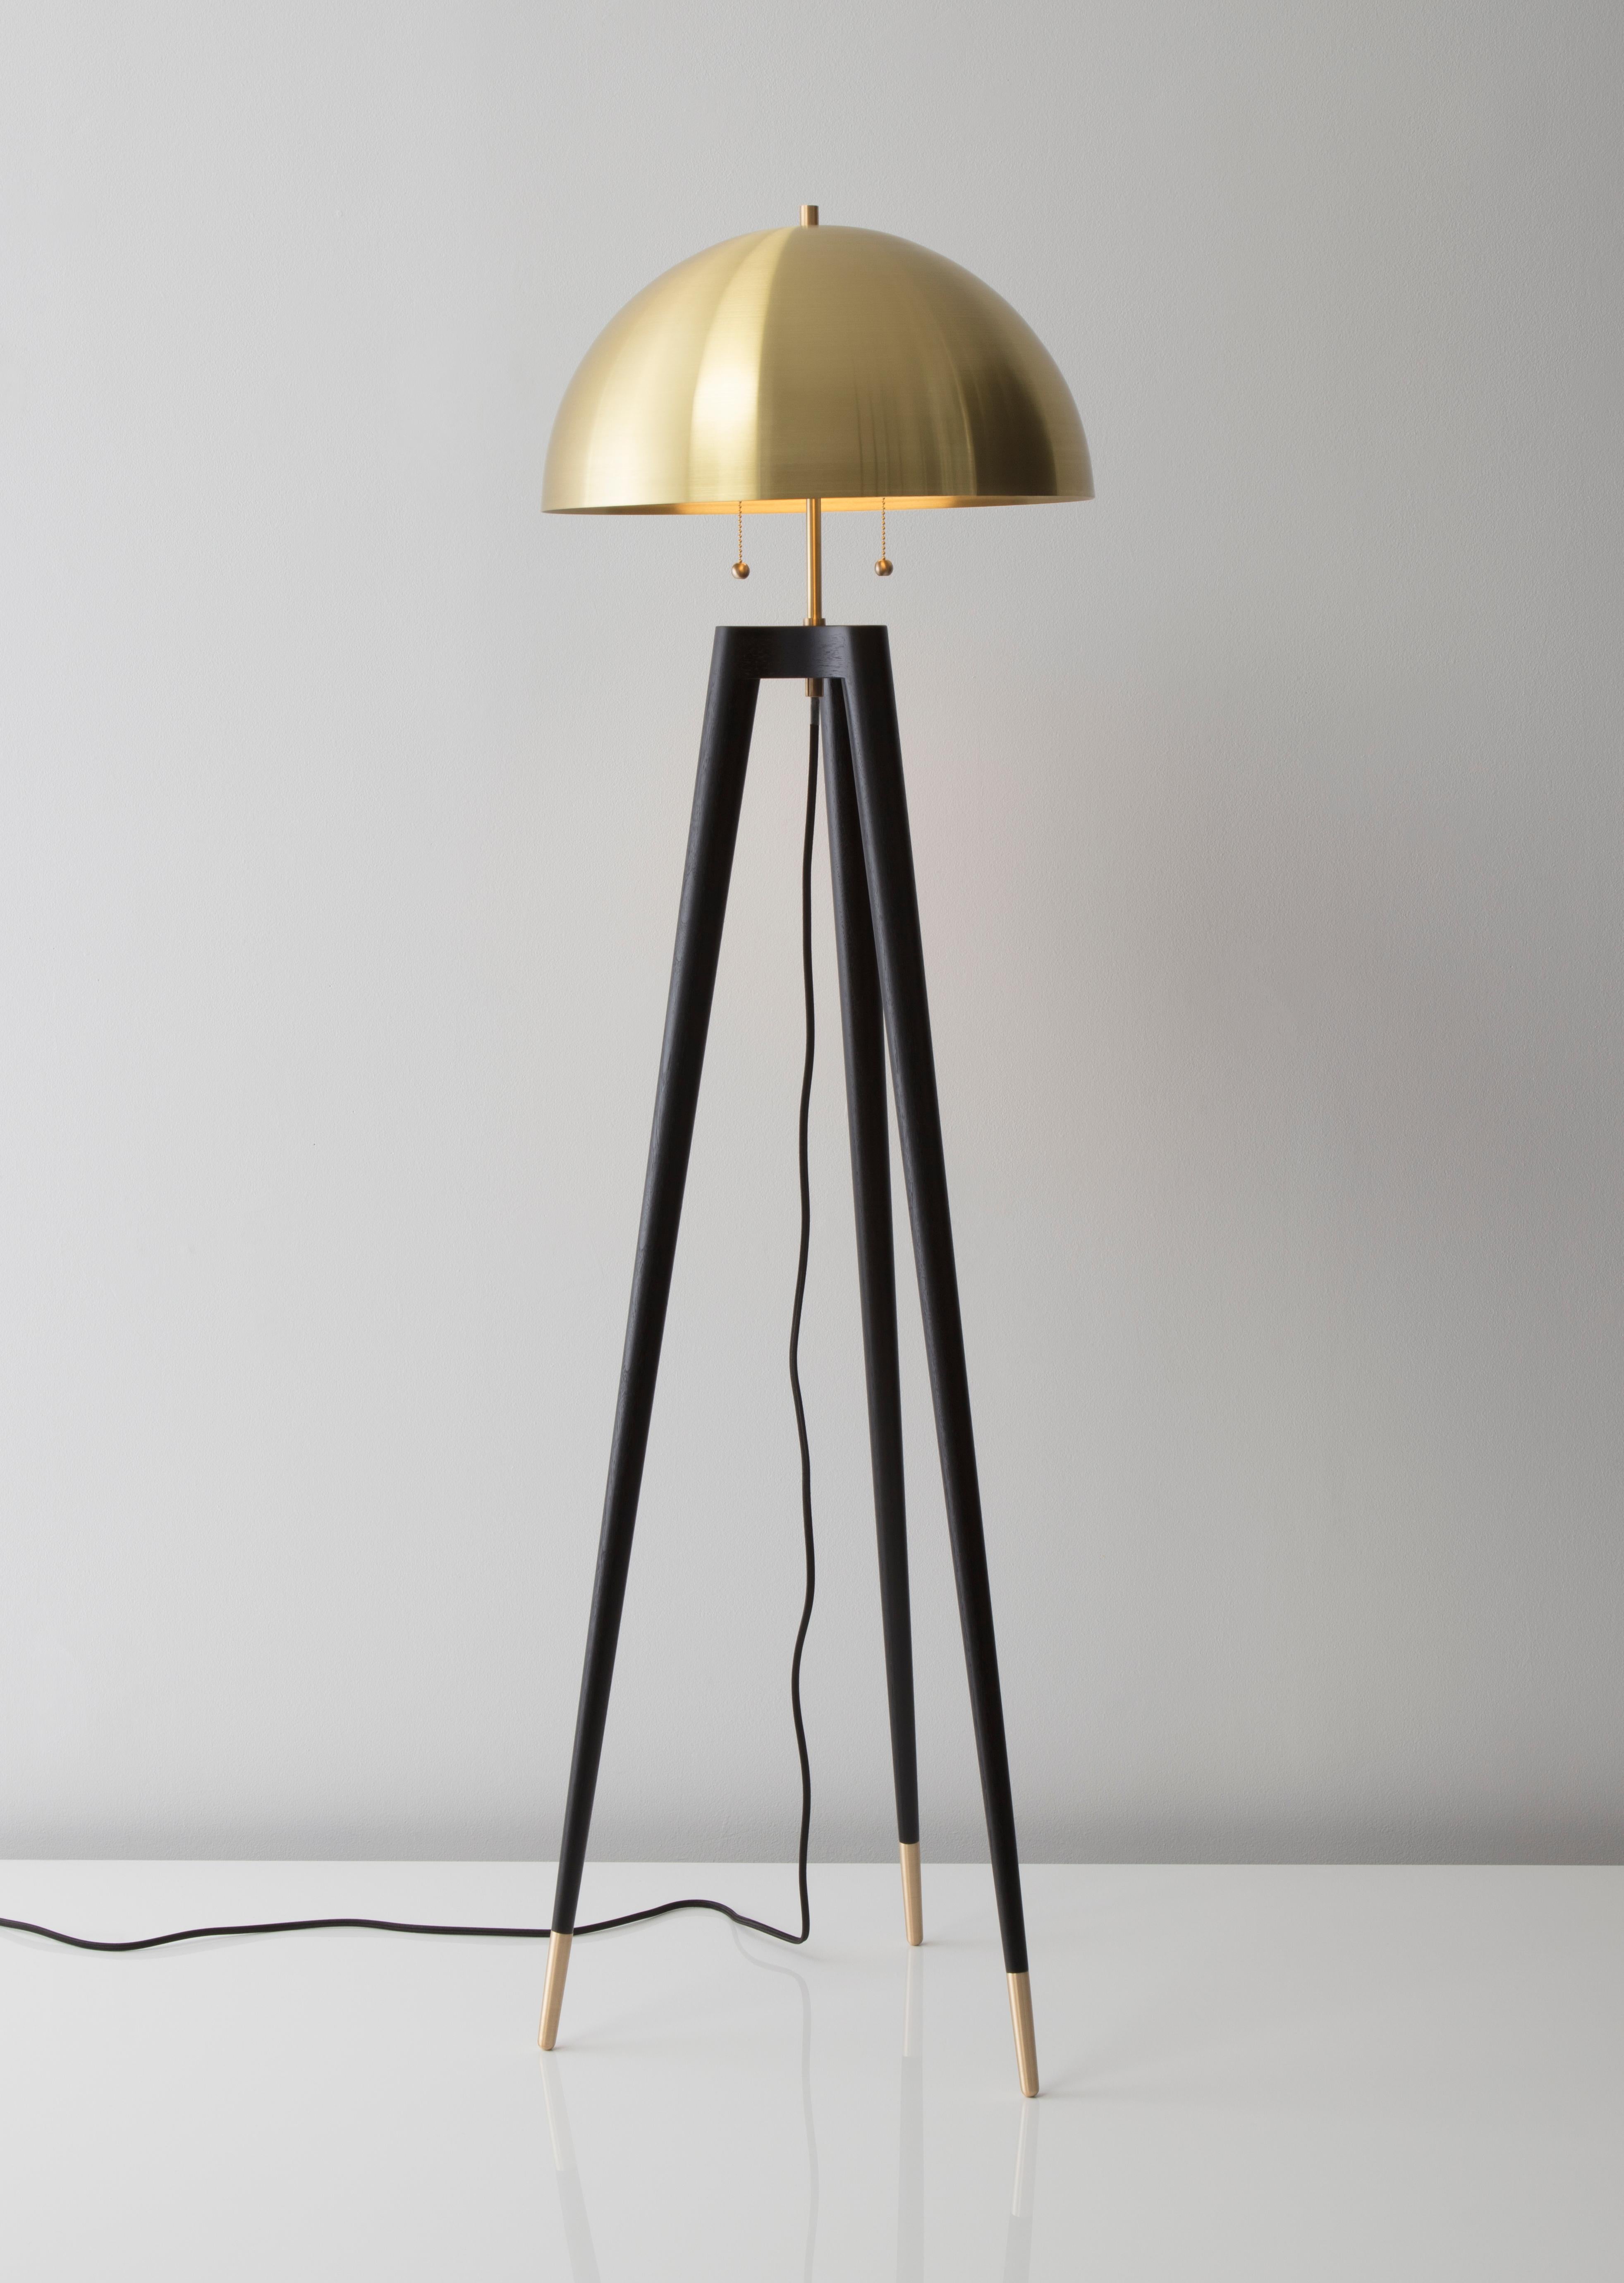 • Fife tripod lamp is lathe turned from solid walnut. The shade is spun from solid brass with a satin finish. 
• A black fabric covered cord hangs loosely from the center of the lamp's base.
• Standard cord length is 12 feet. Cord on 220V fixtures